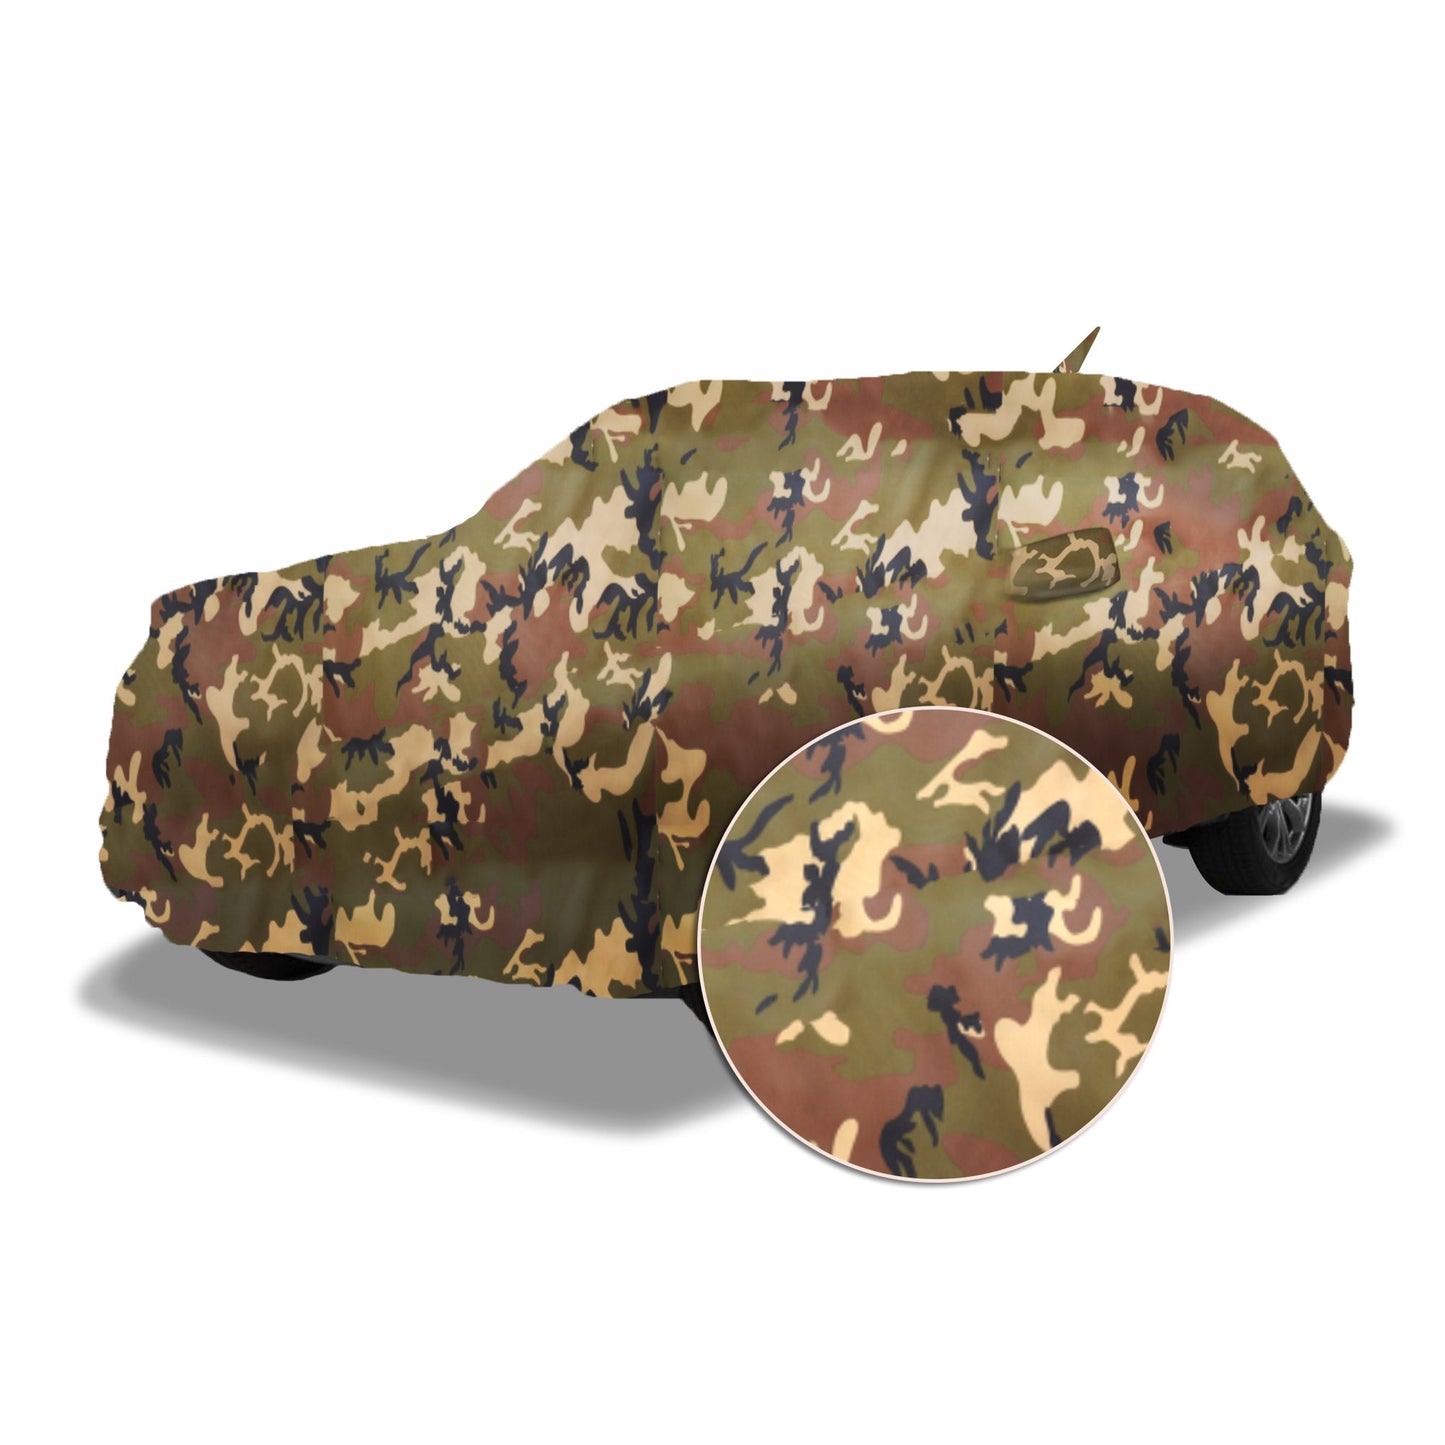 Ascot Tata Nexon Car Body Cover Extra Strong & Dust Proof Jungle Military Car Cover with UV Proof & Water-Resistant Coating